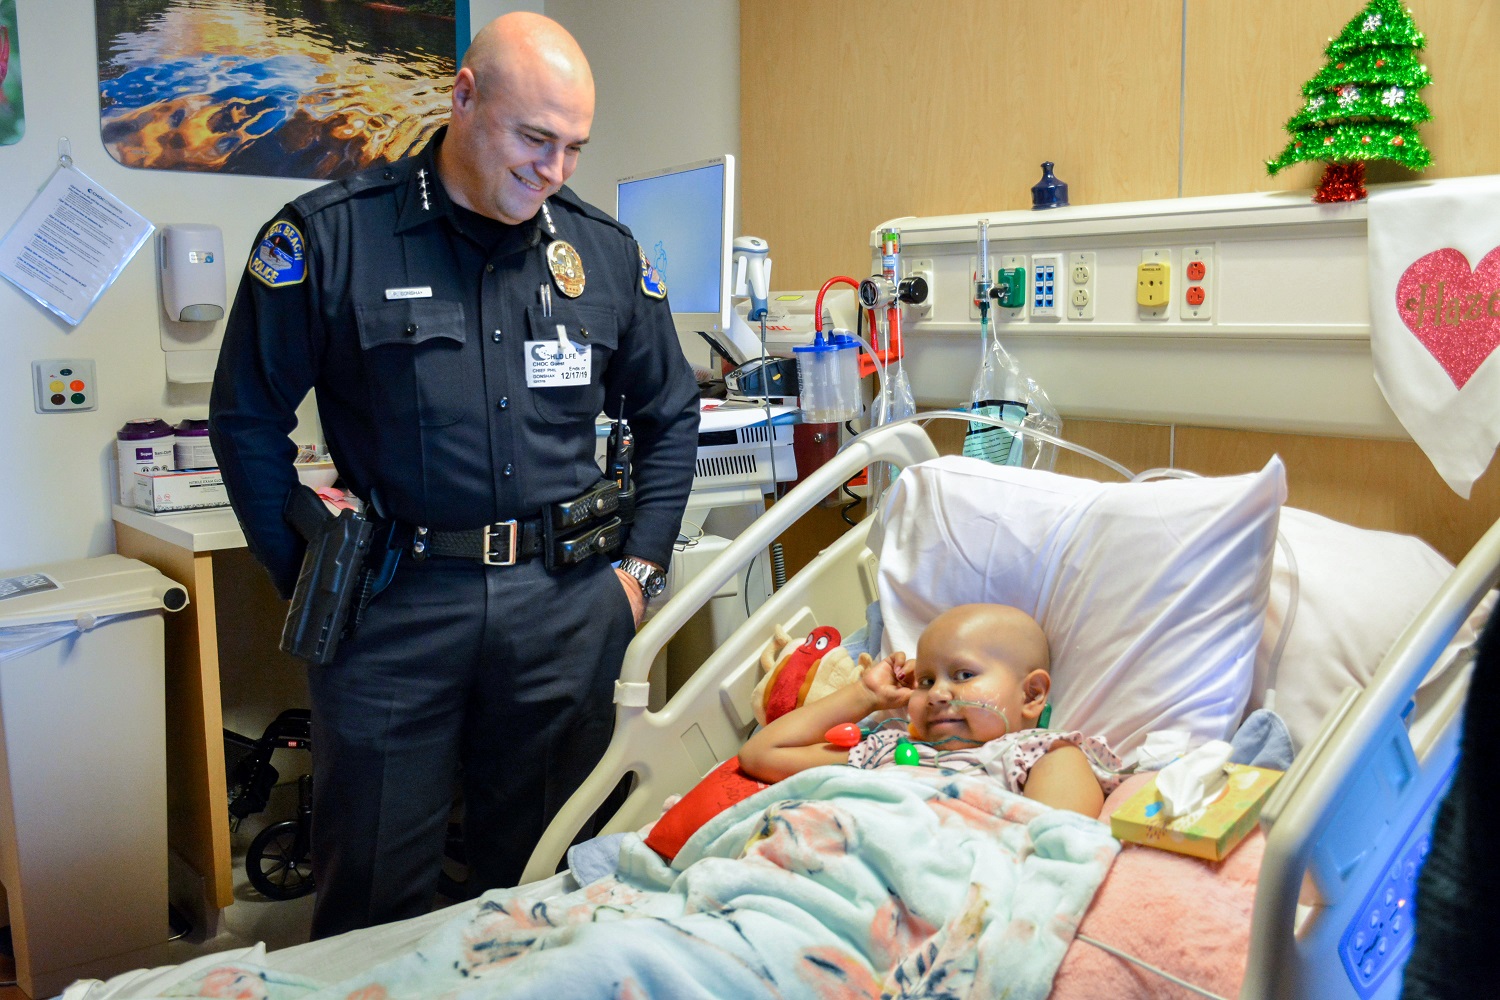 A police officer smiling at a child in a hospital room with holiday decorations; the child is wearing a holiday light necklace